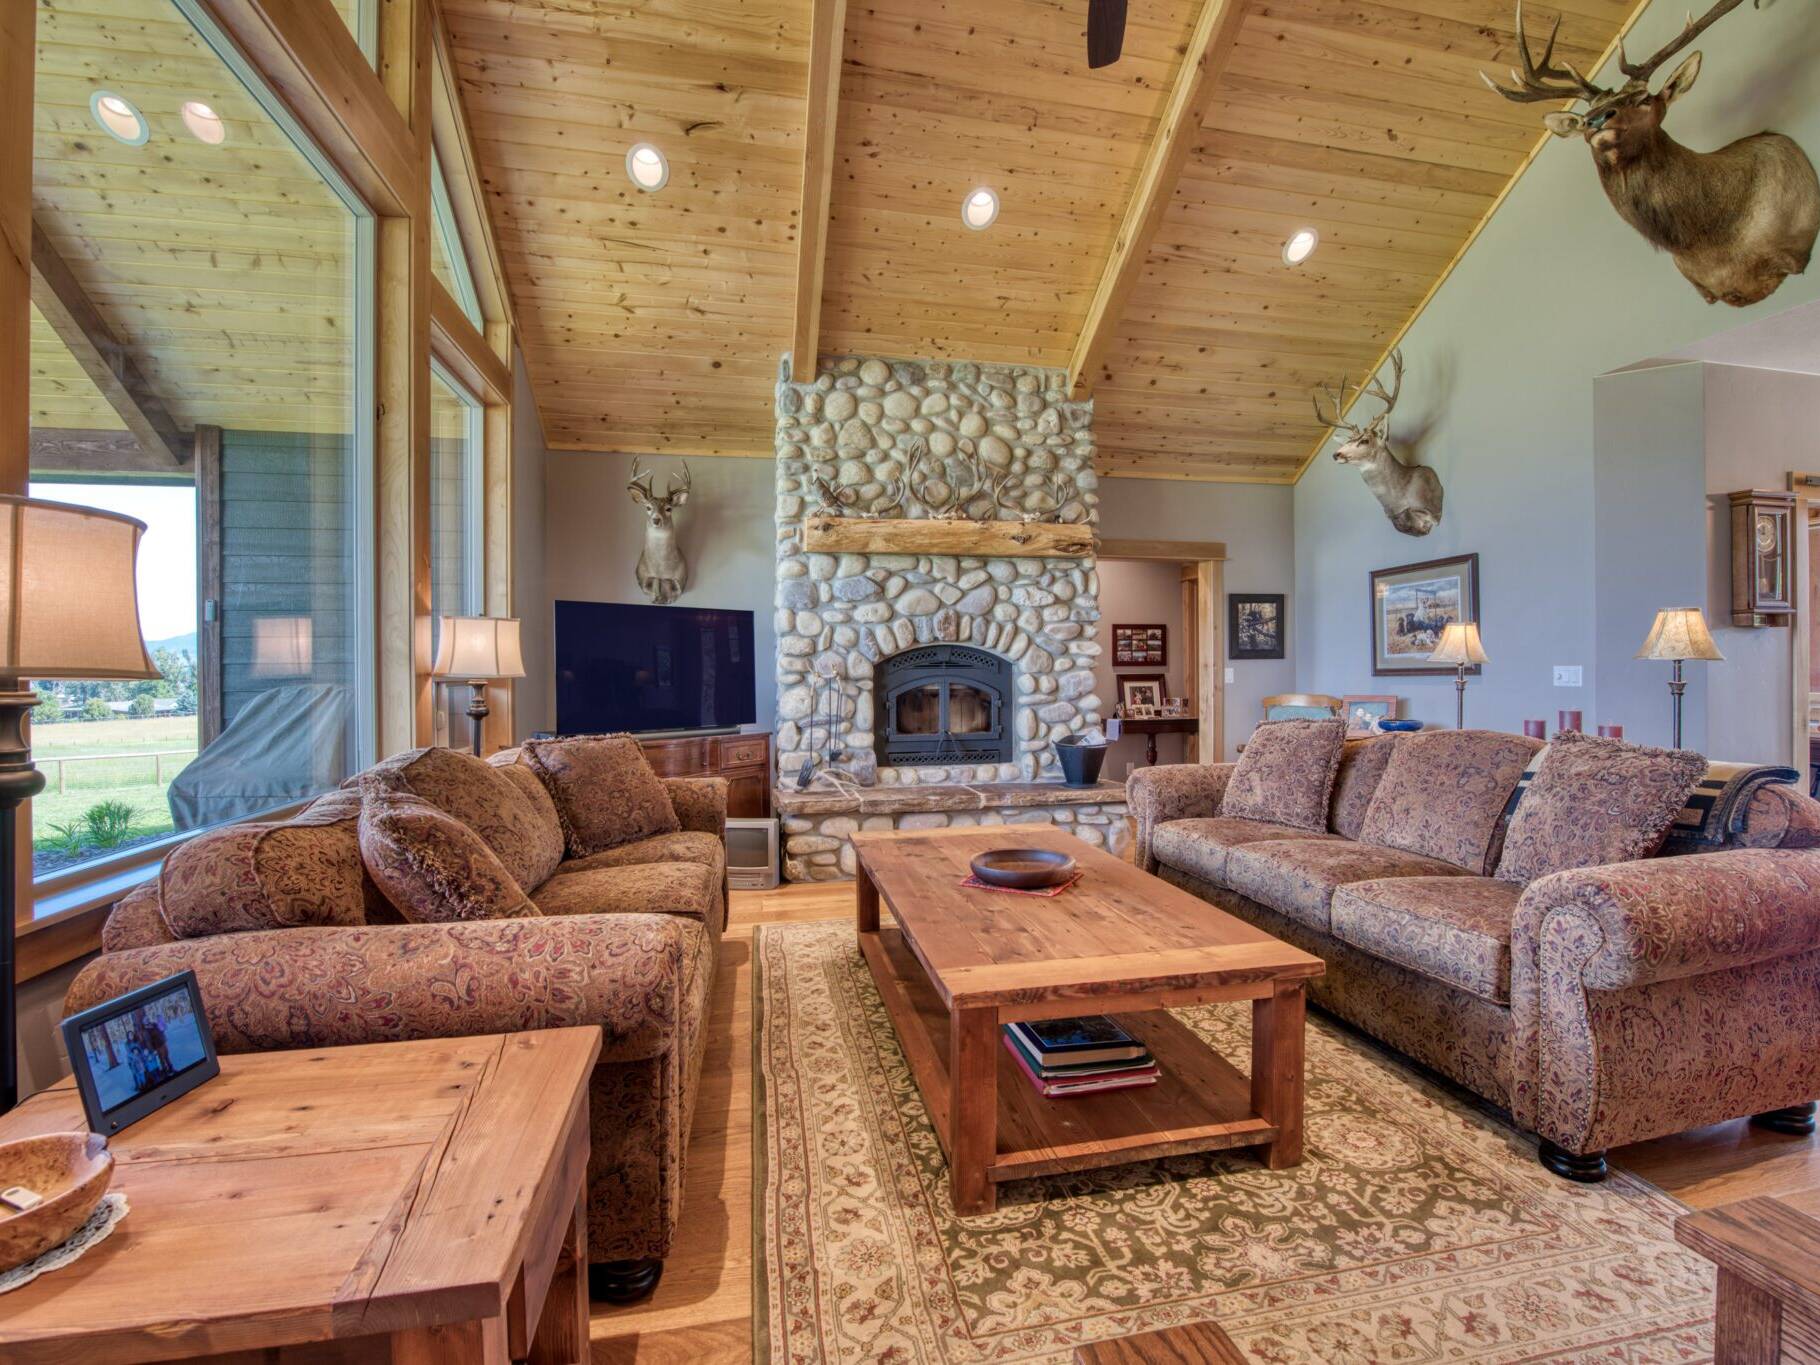 Great room custom wood burning fireplace with natural river rock, vaulted t&g ceiling with wood beams in a custom home built by Big Sky Builders in Stevensville, MT